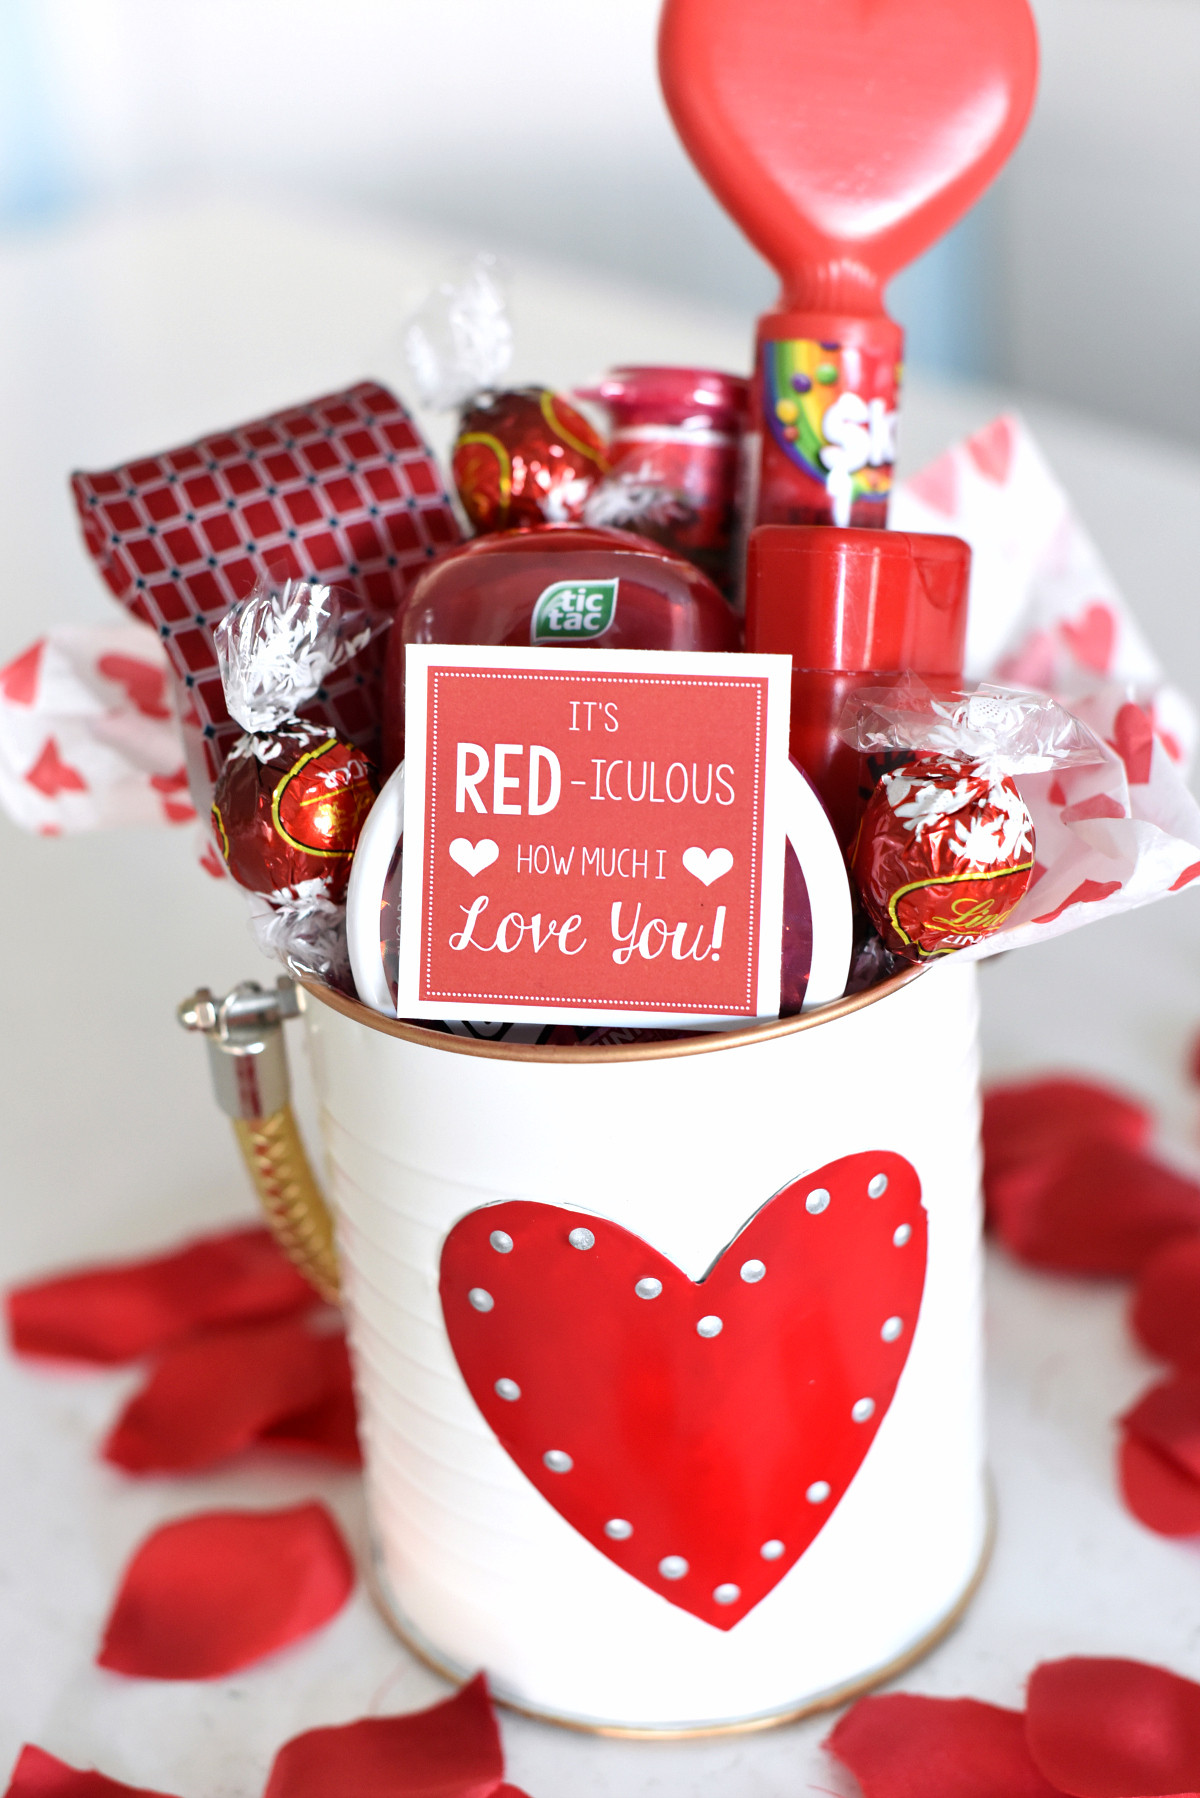 Valentines Day Candy Gift Ideas
 Cute Valentine s Day Gift Idea RED iculous Basket